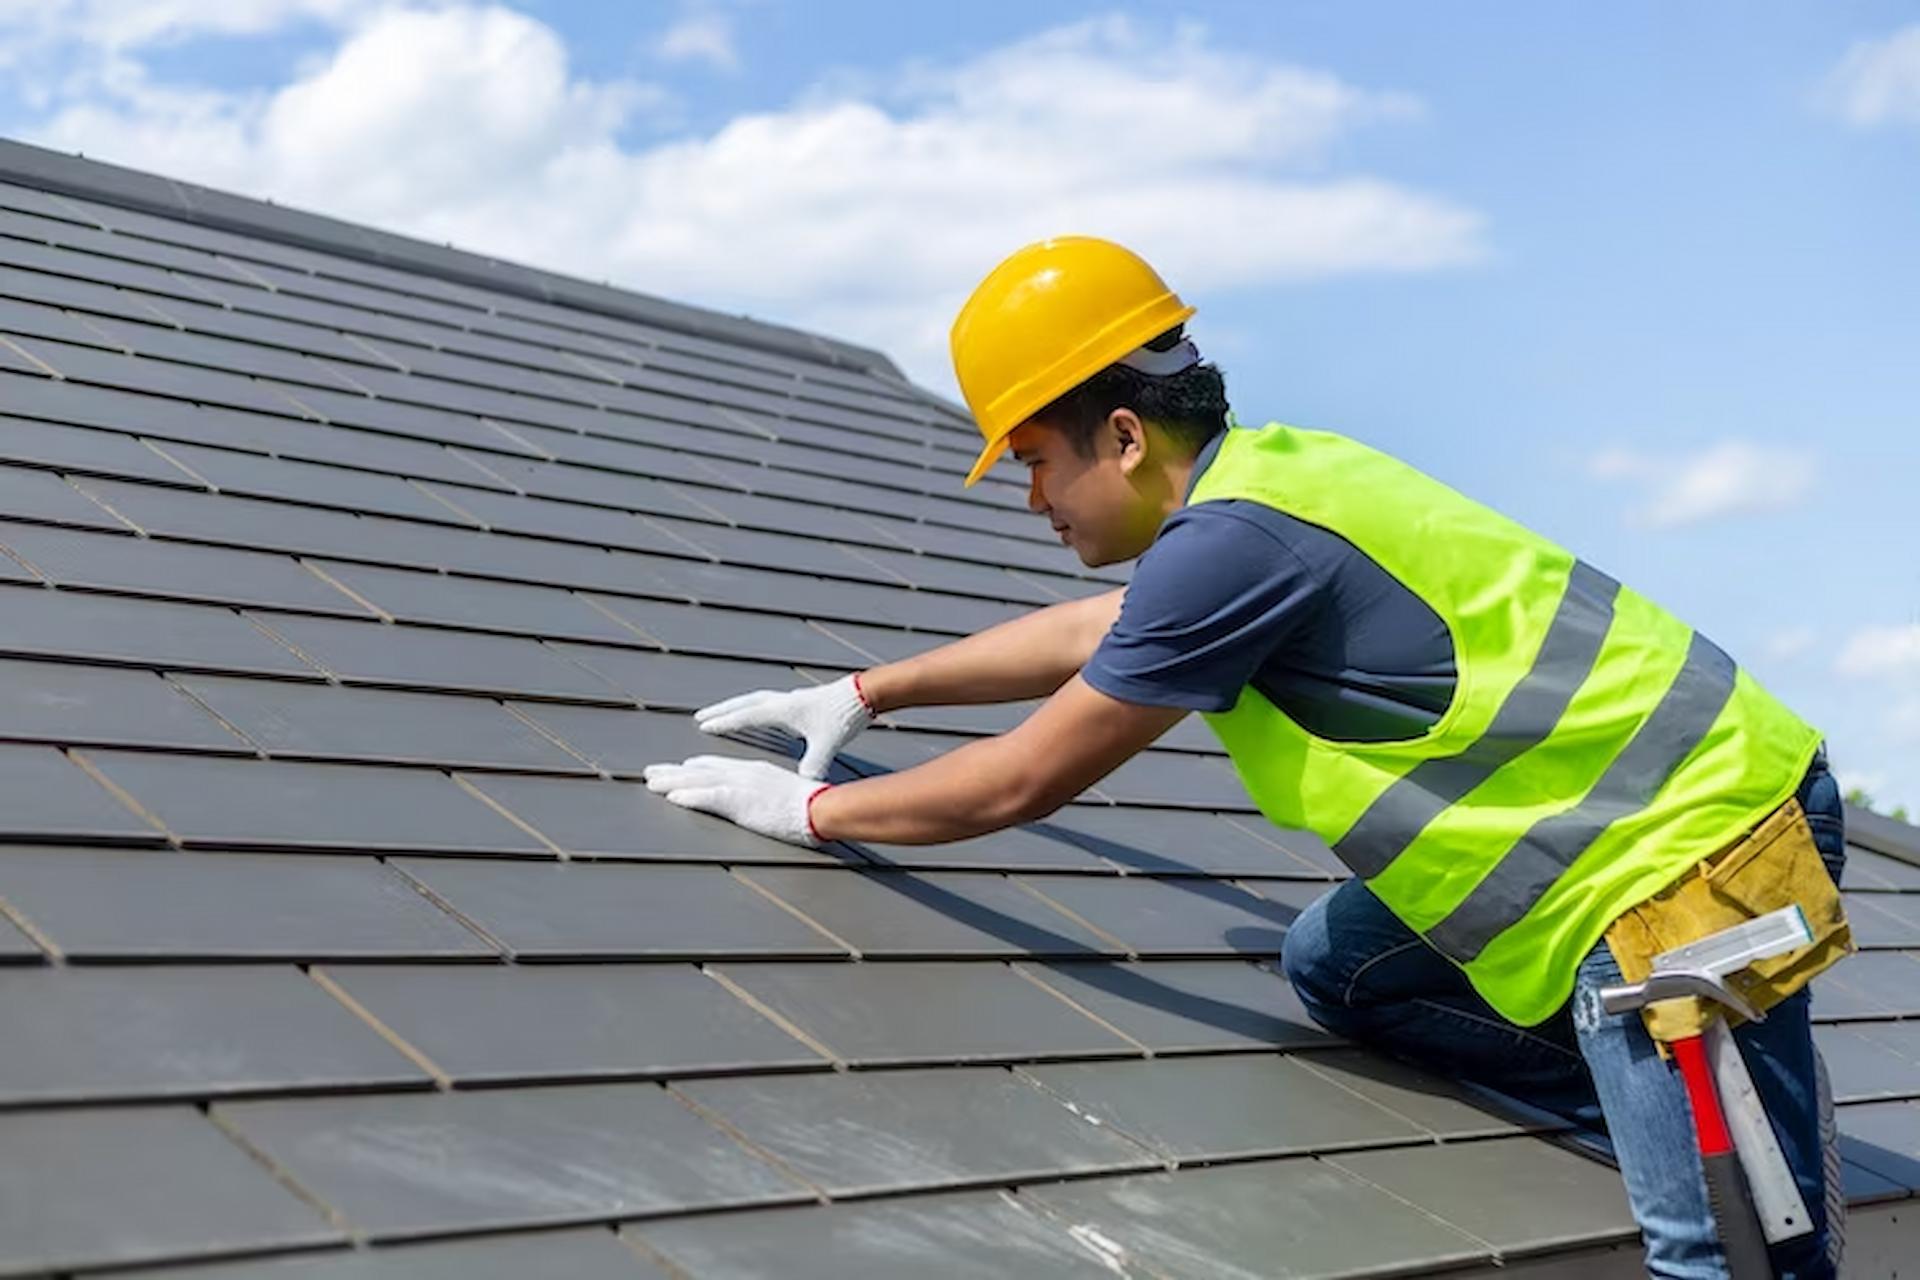 Chiswick Roofing: The Top Choice for Quality Roofing Services